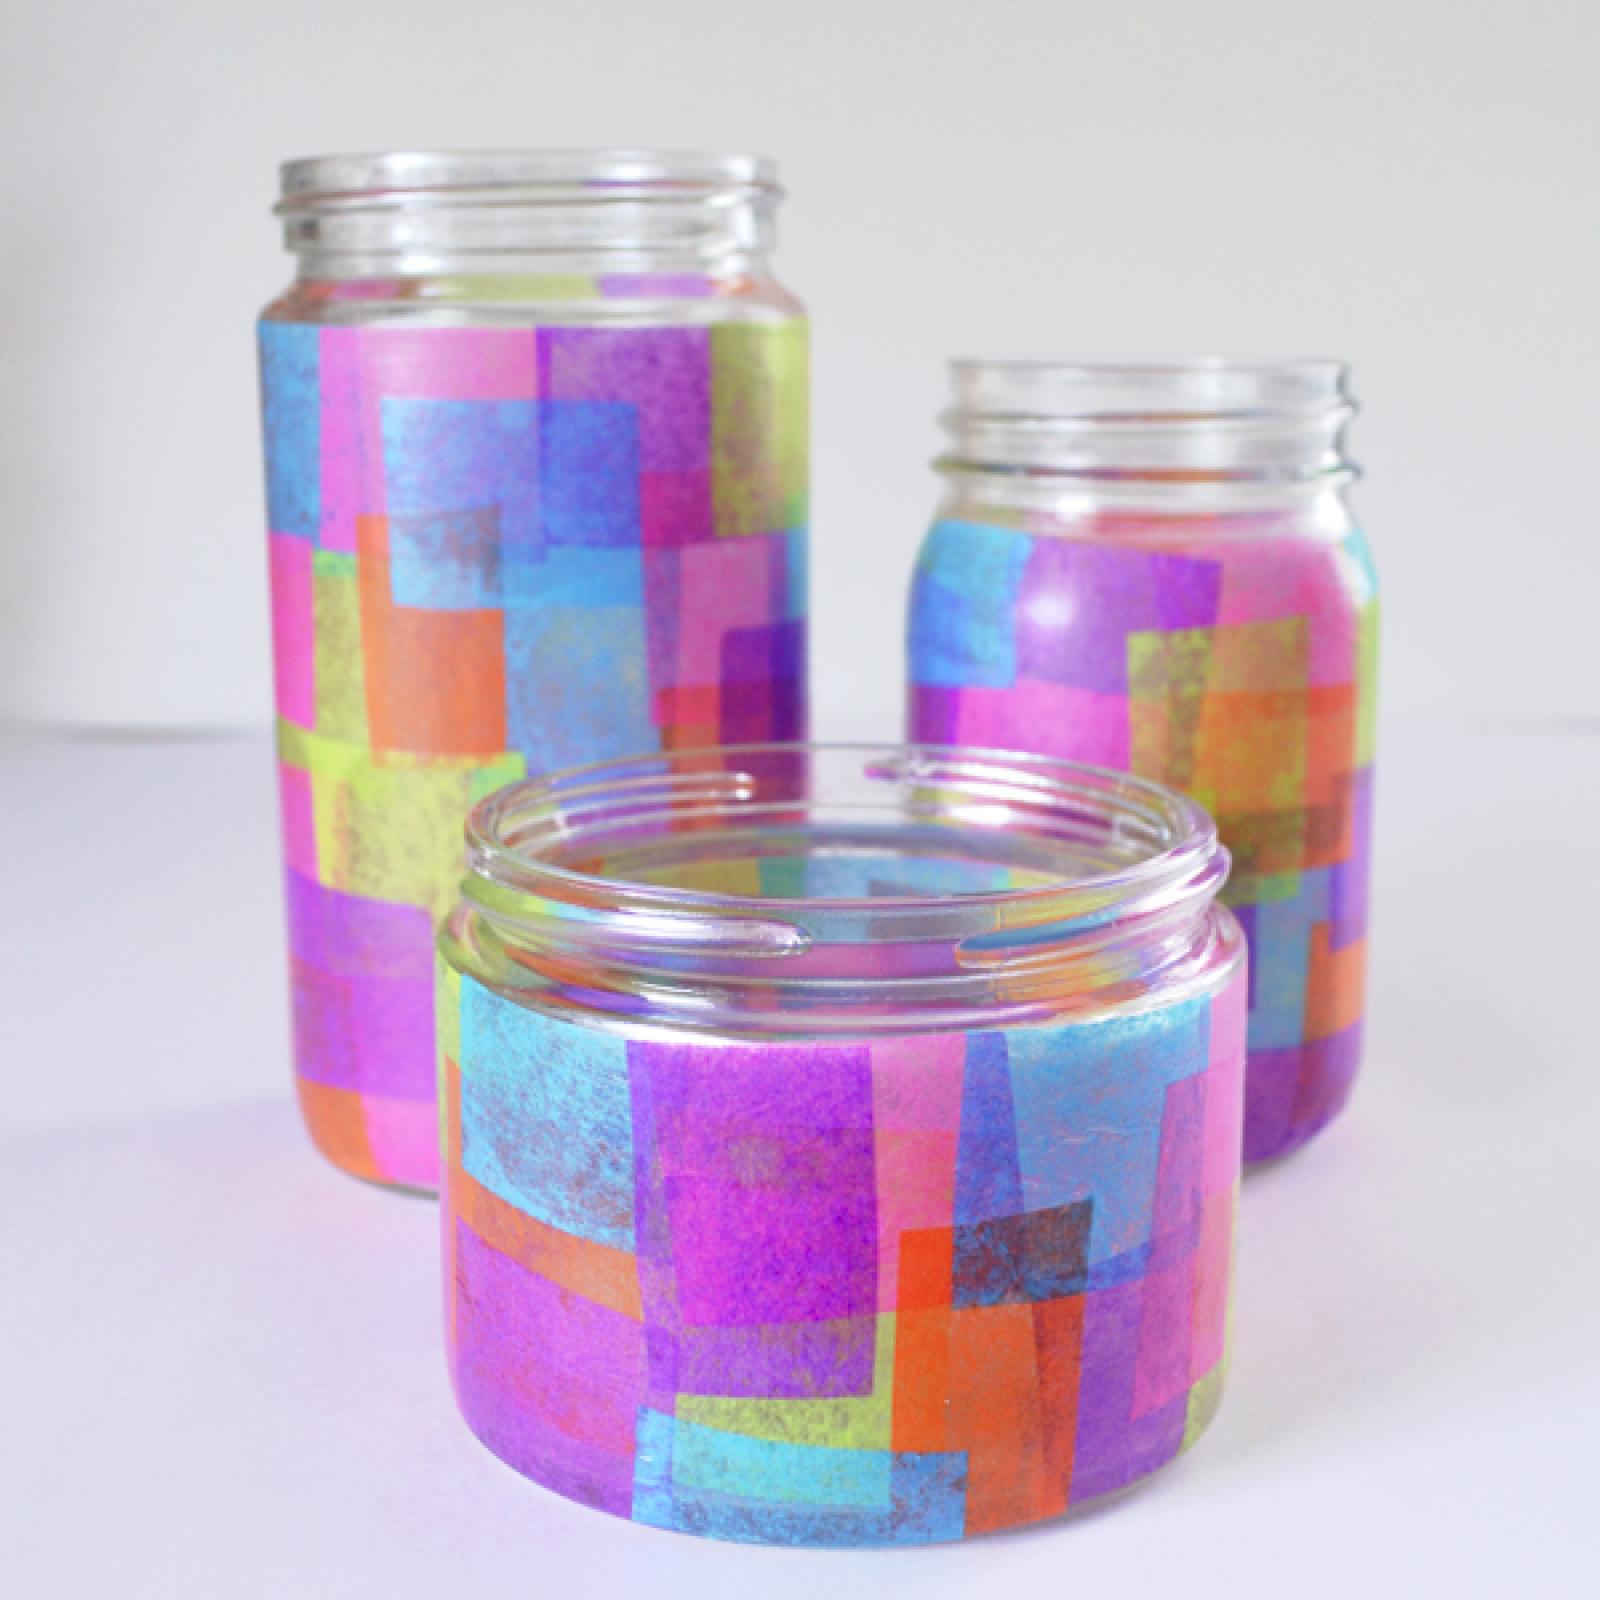 Upcycled stain glass jars